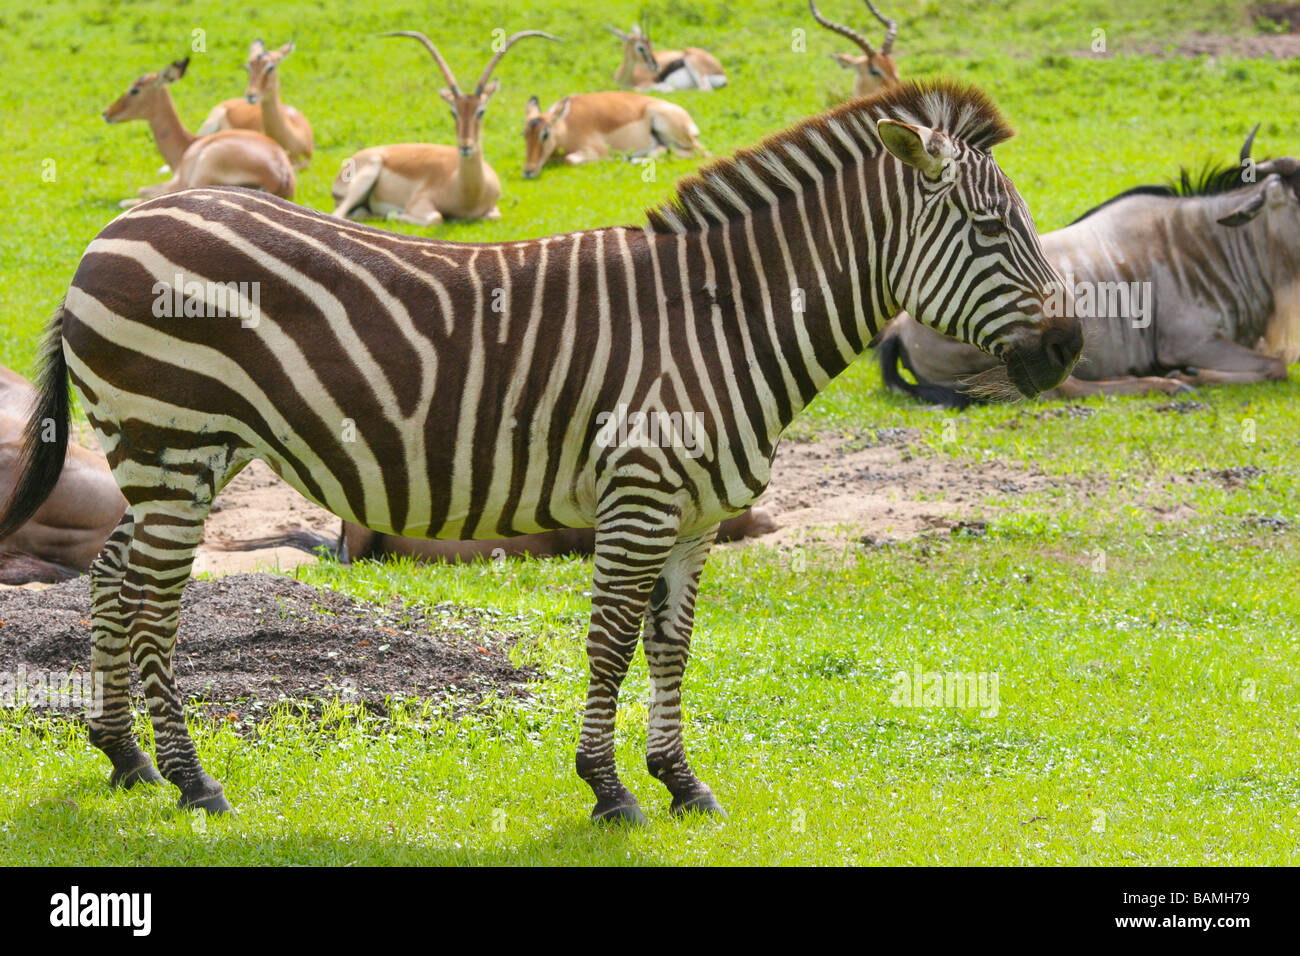 zebra with other animals in the background Stock Photo